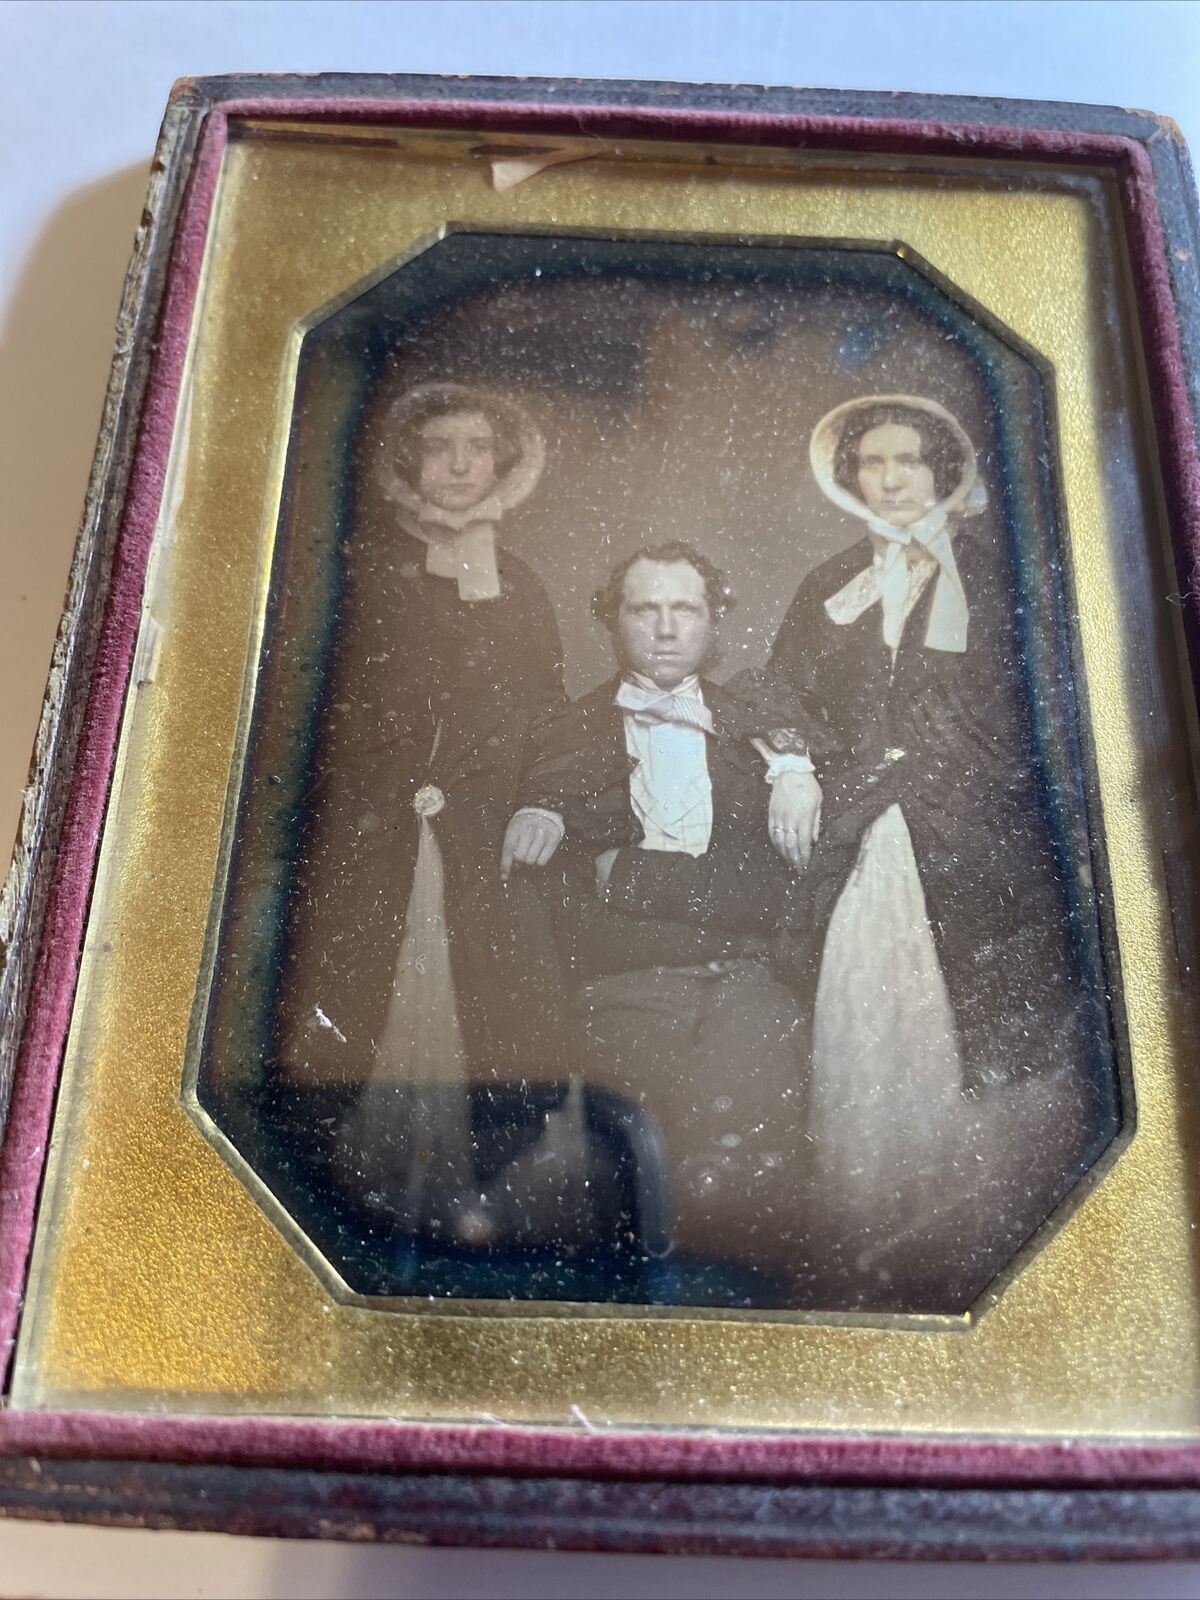 1/4 PLATE DAGUERREOTYPE OF FAMILY - FATHER  DAUGHTERS,WHITE BONNETS HAND COLORED